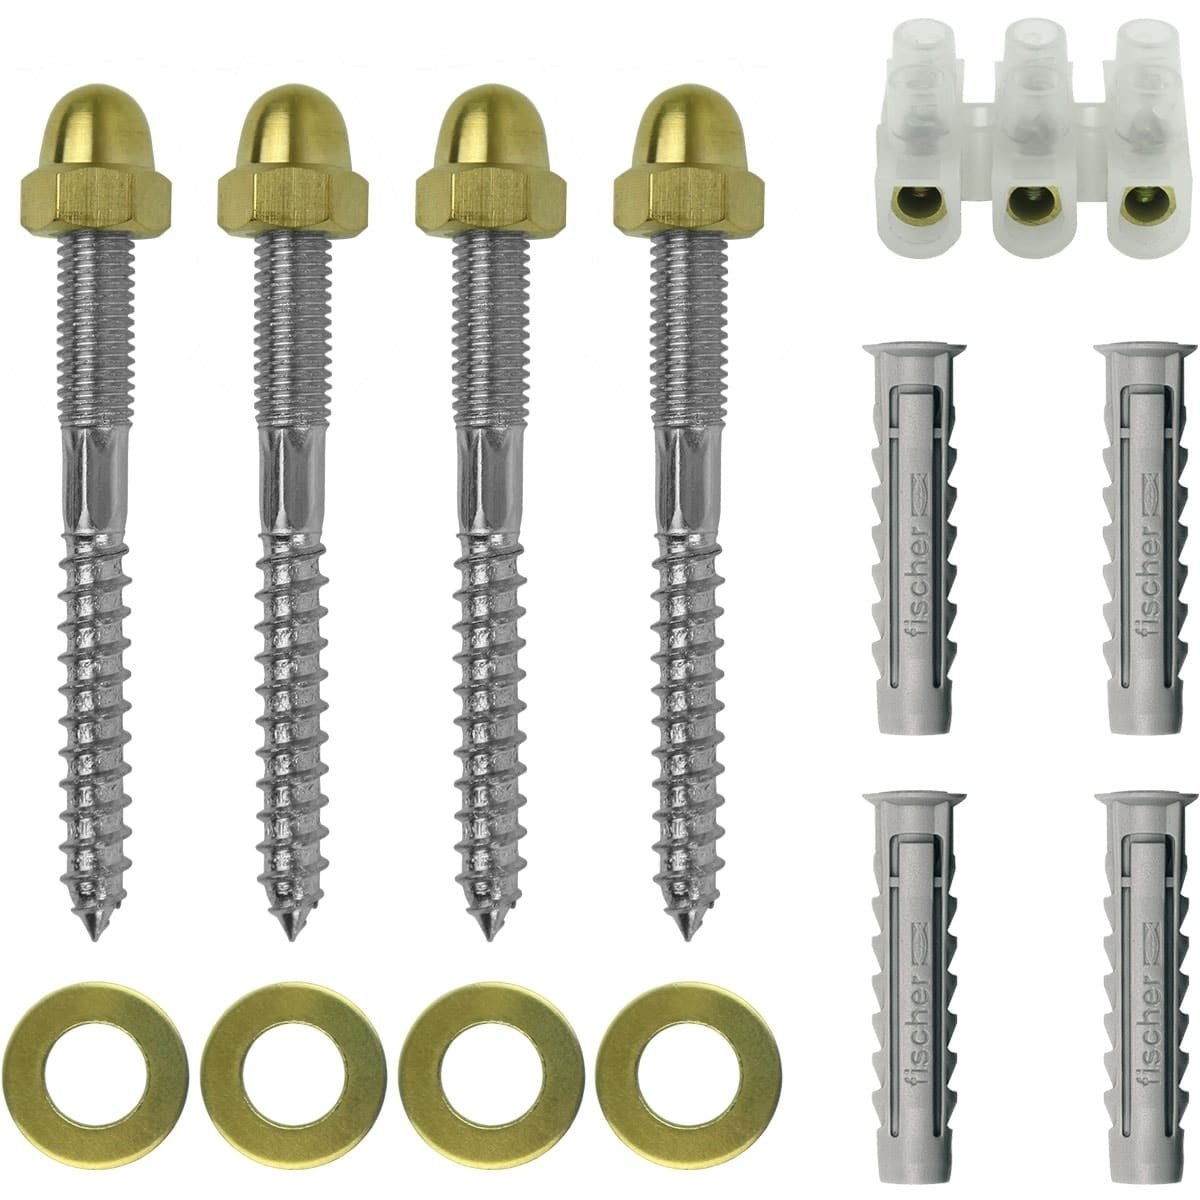 Outdoor Lighting Mounting Material Mounting set M10 stick screws 120 mm - 4-pieces